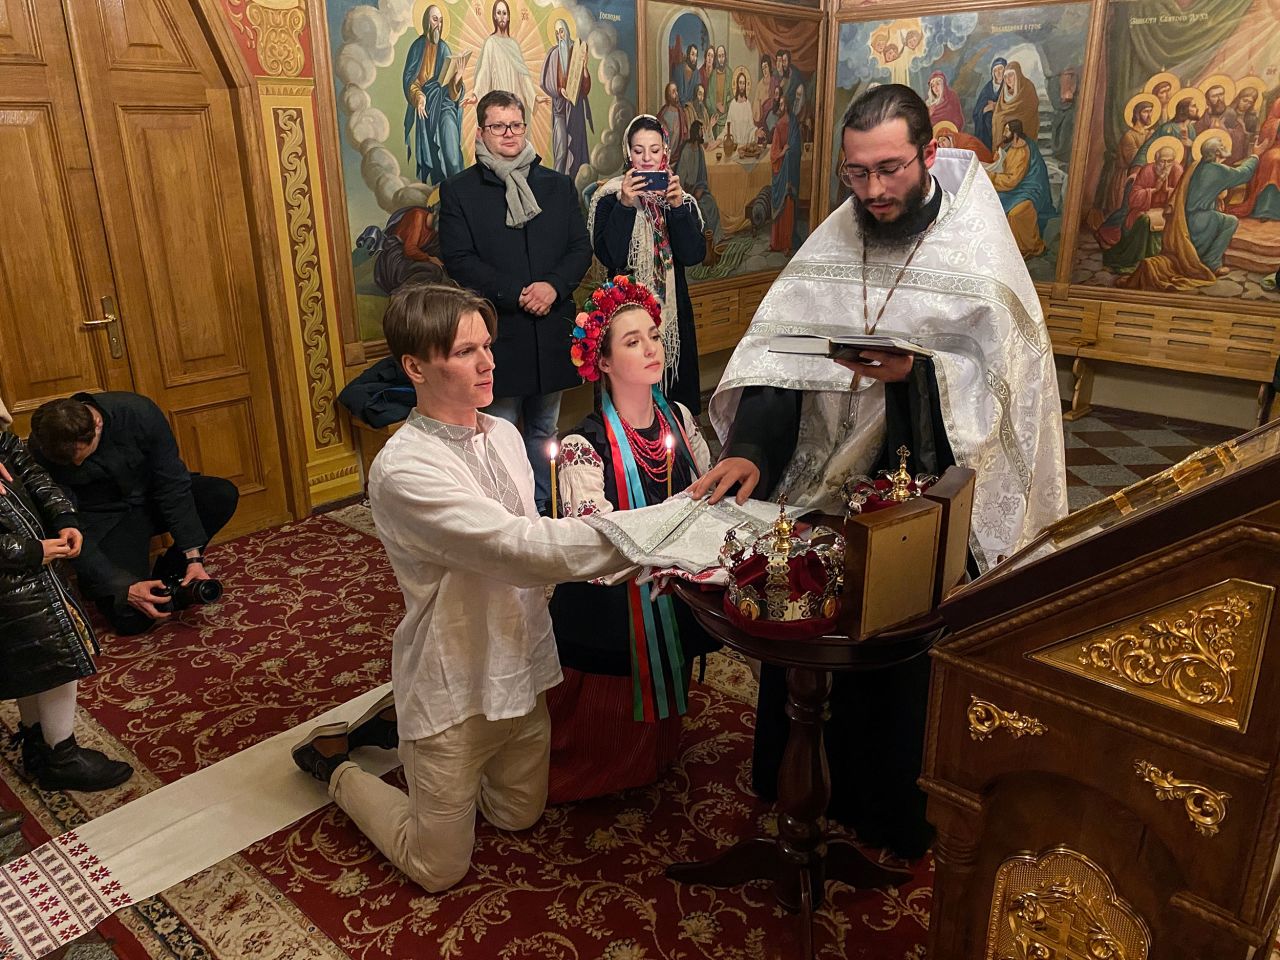 Sviatoslav Fursin, left, and Yaryna Arieva kneel during <a href="https://www.cnn.com/2022/02/24/europe/ukraine-wedding-invasion-thursday-intl/index.html" target="_blank">their wedding ceremony</a> at the St. Michael's Cathedral in Kyiv on February 24. They had planned on getting married in May, but they rushed to tie the knot due to the attacks by Russian forces. "We maybe can die, and we just wanted to be together before all of that," Arieva said.